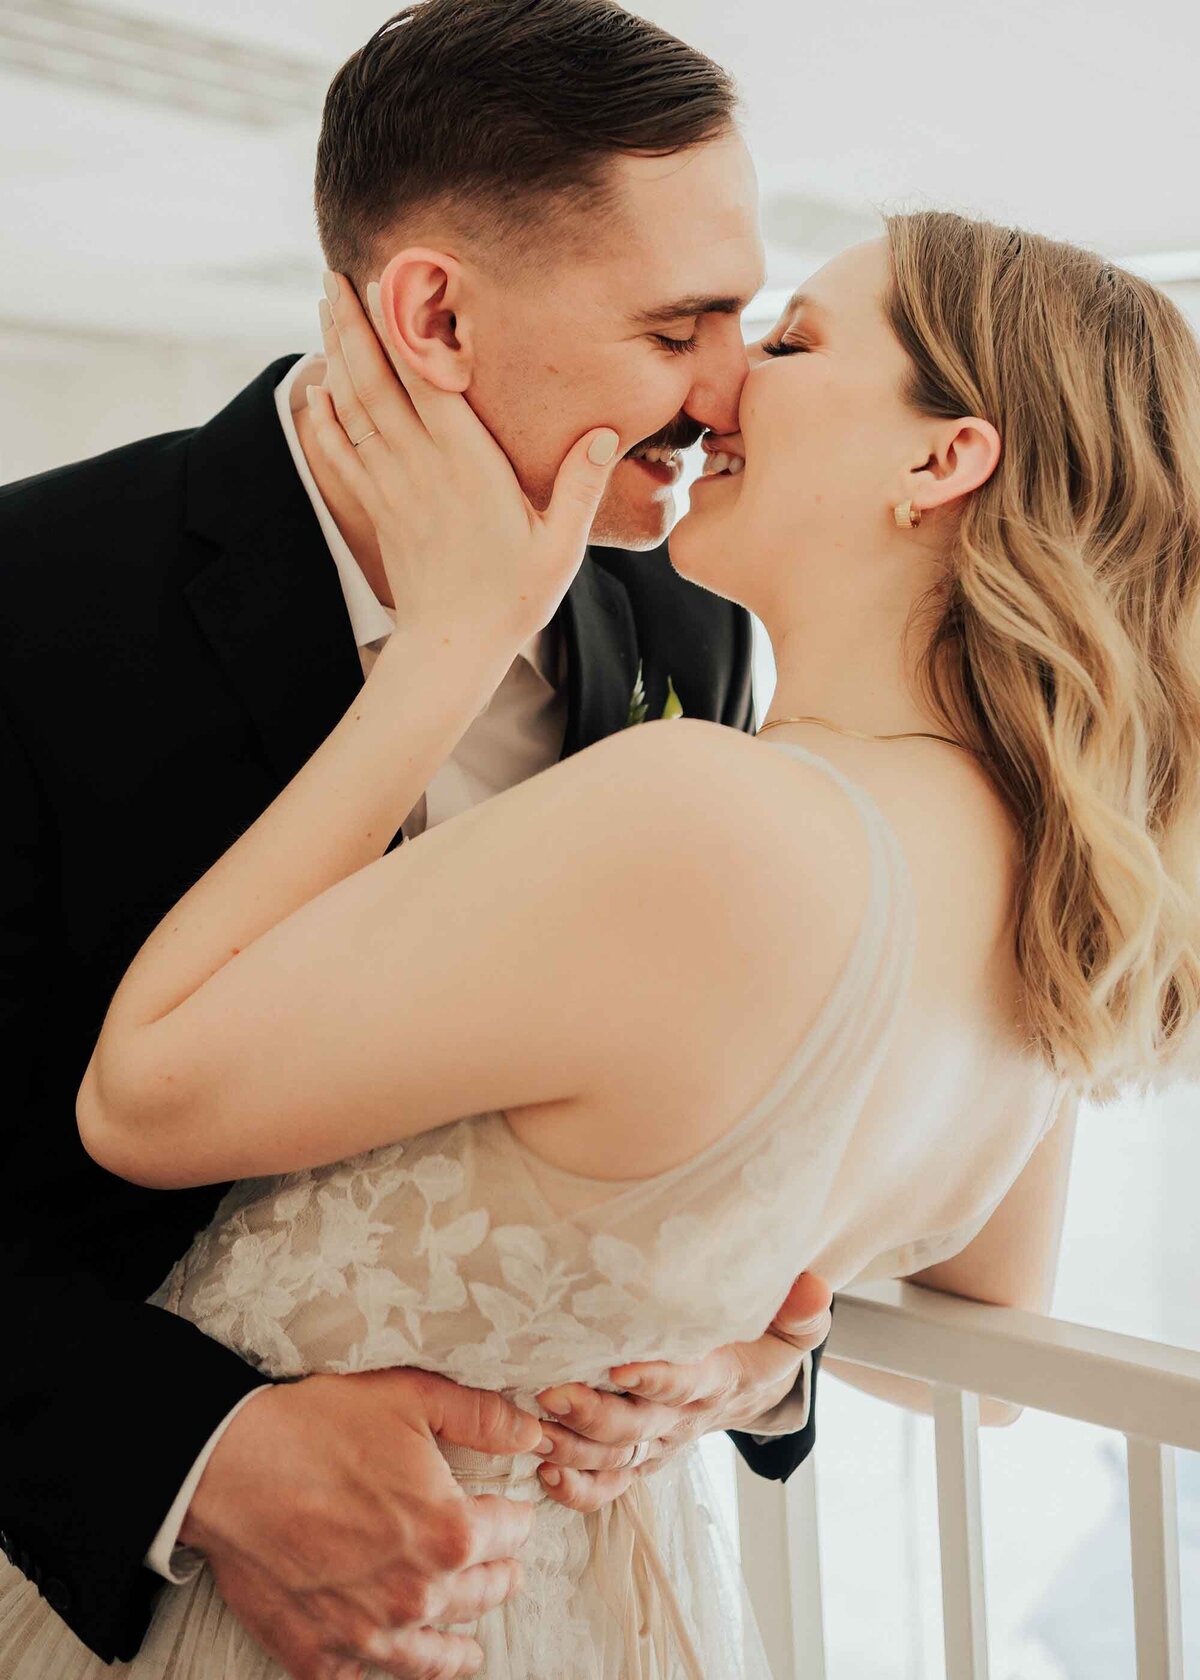 Maddie Rae Photography close up of bride and groom doing a slight dip kiss. her hand is on his face and his hands are on her waist